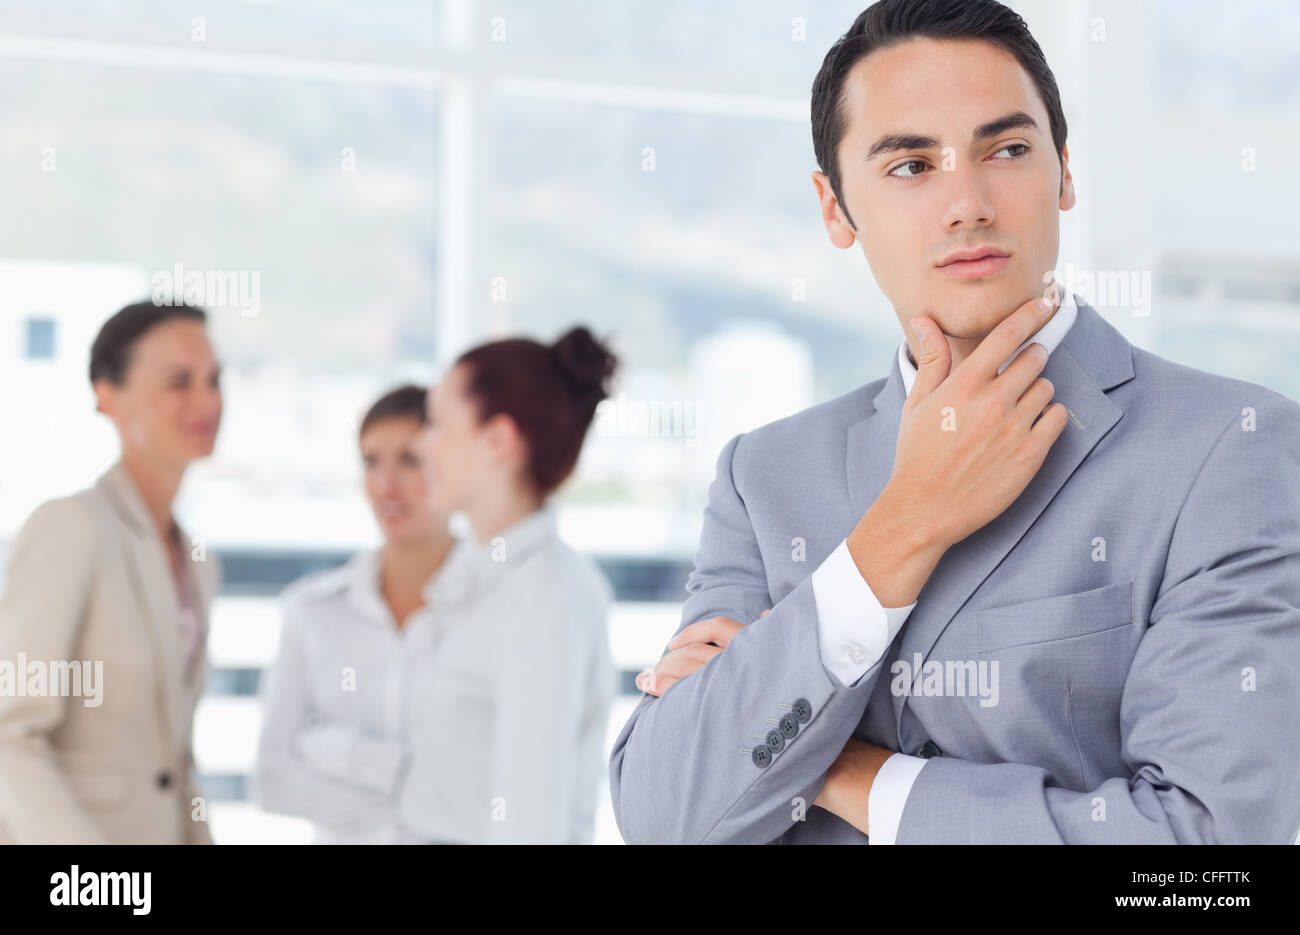 Thoughtful businessman with colleagues behind him Stock Photo